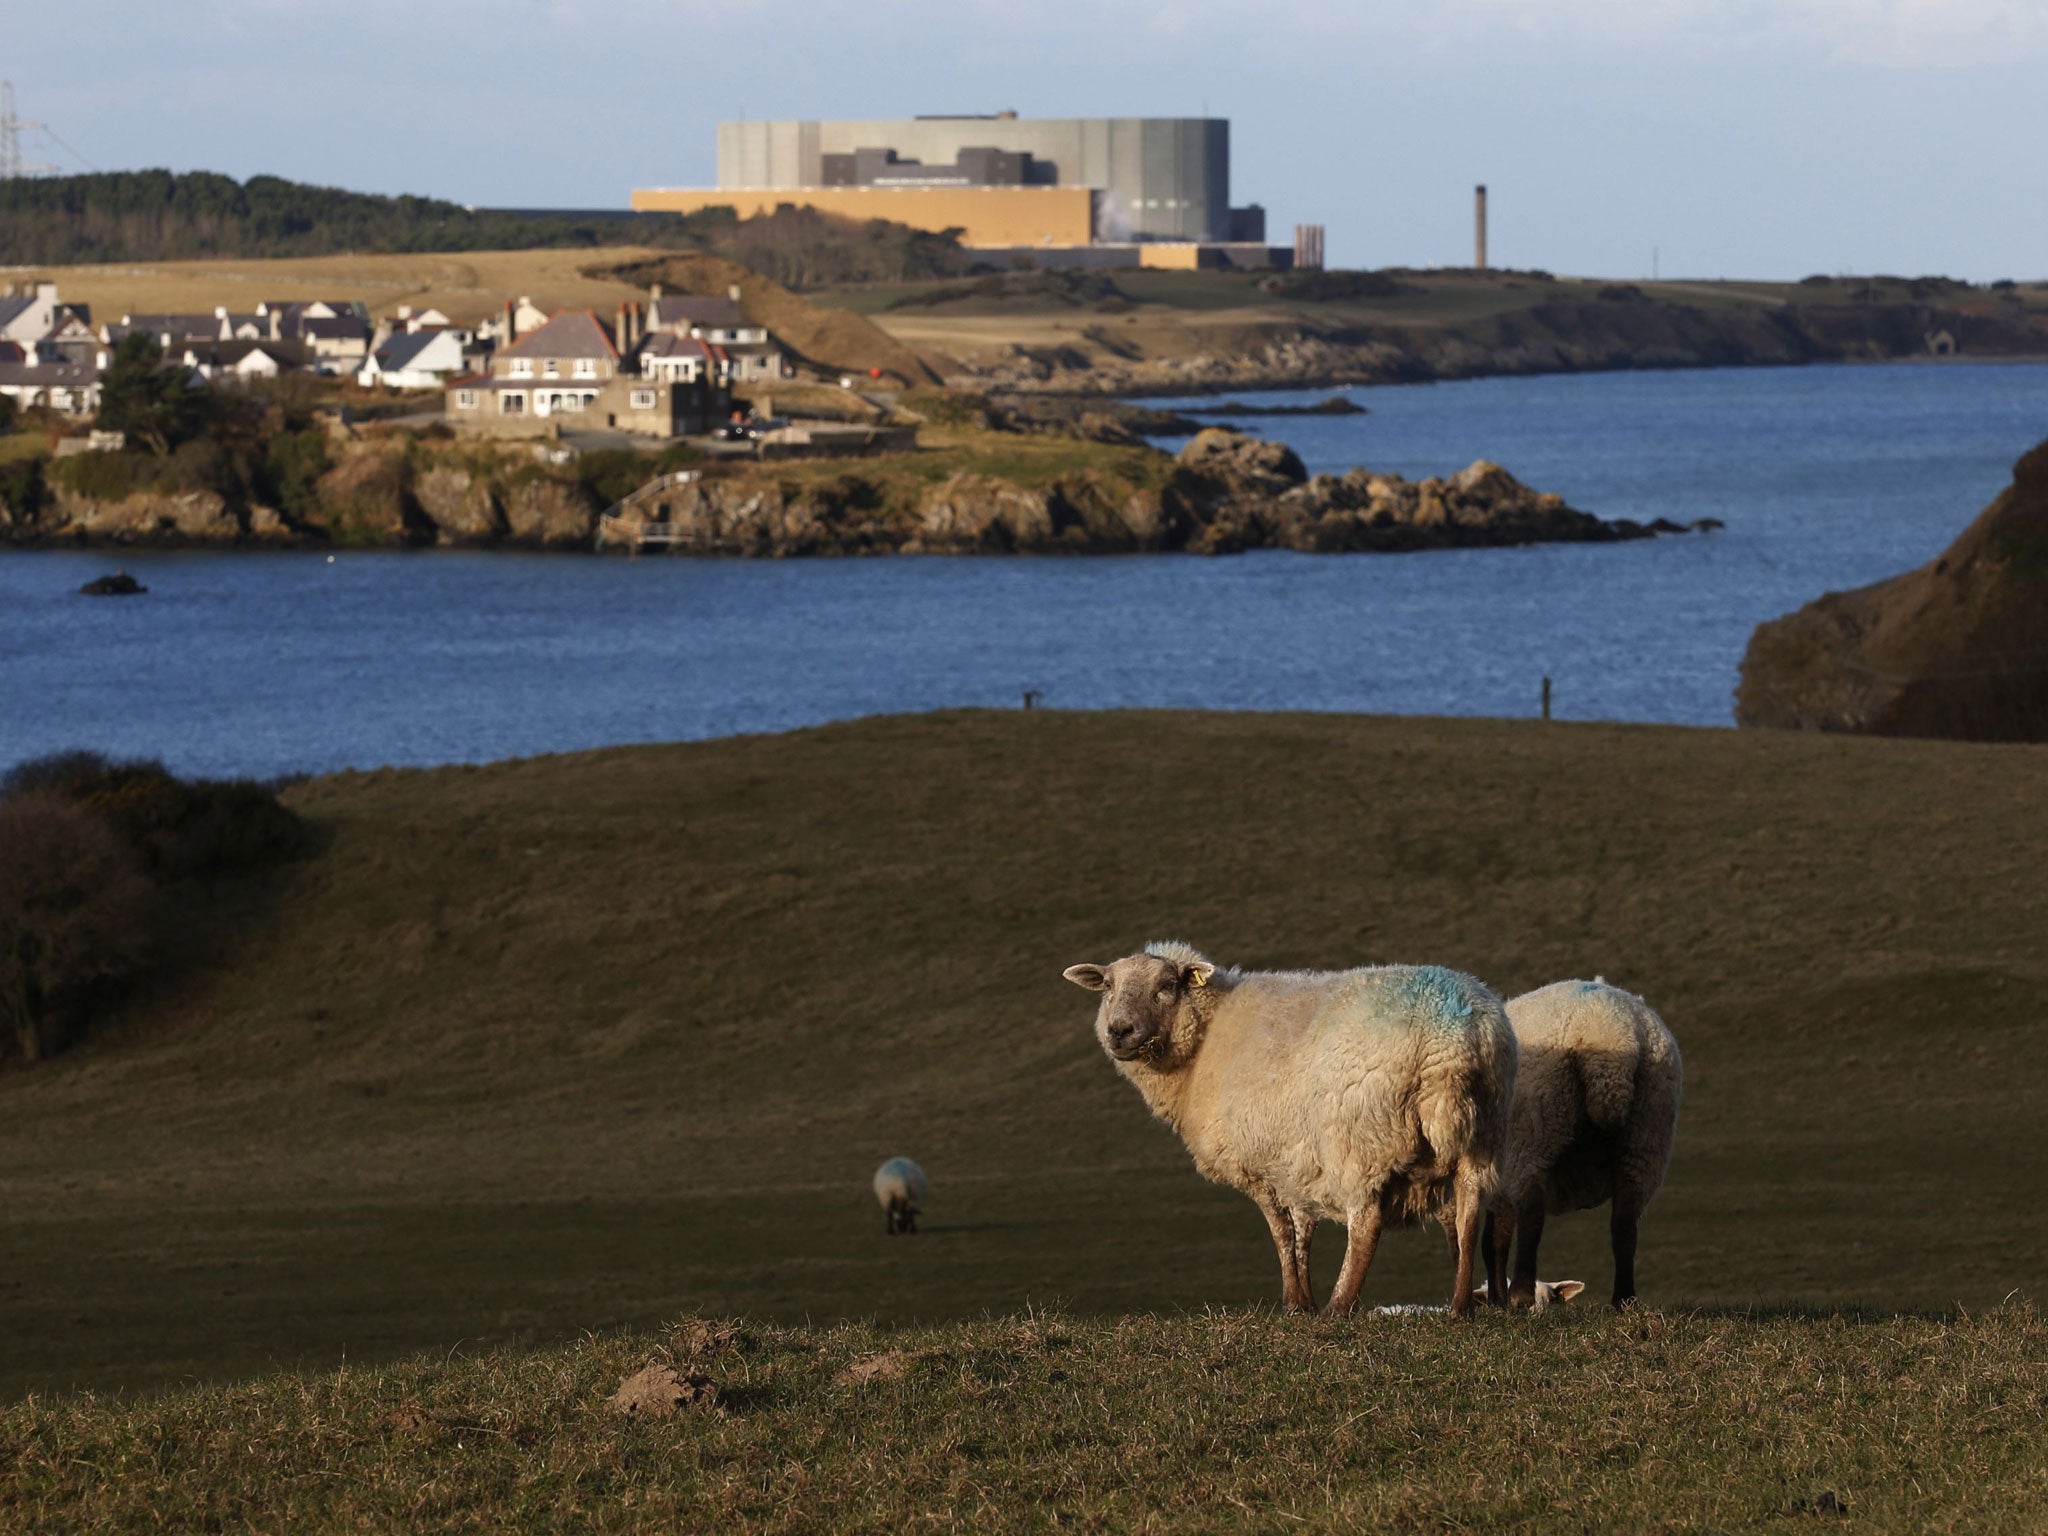 Wylfa nuclear station in Cemaes, Wales could now be backed by Chinese investors